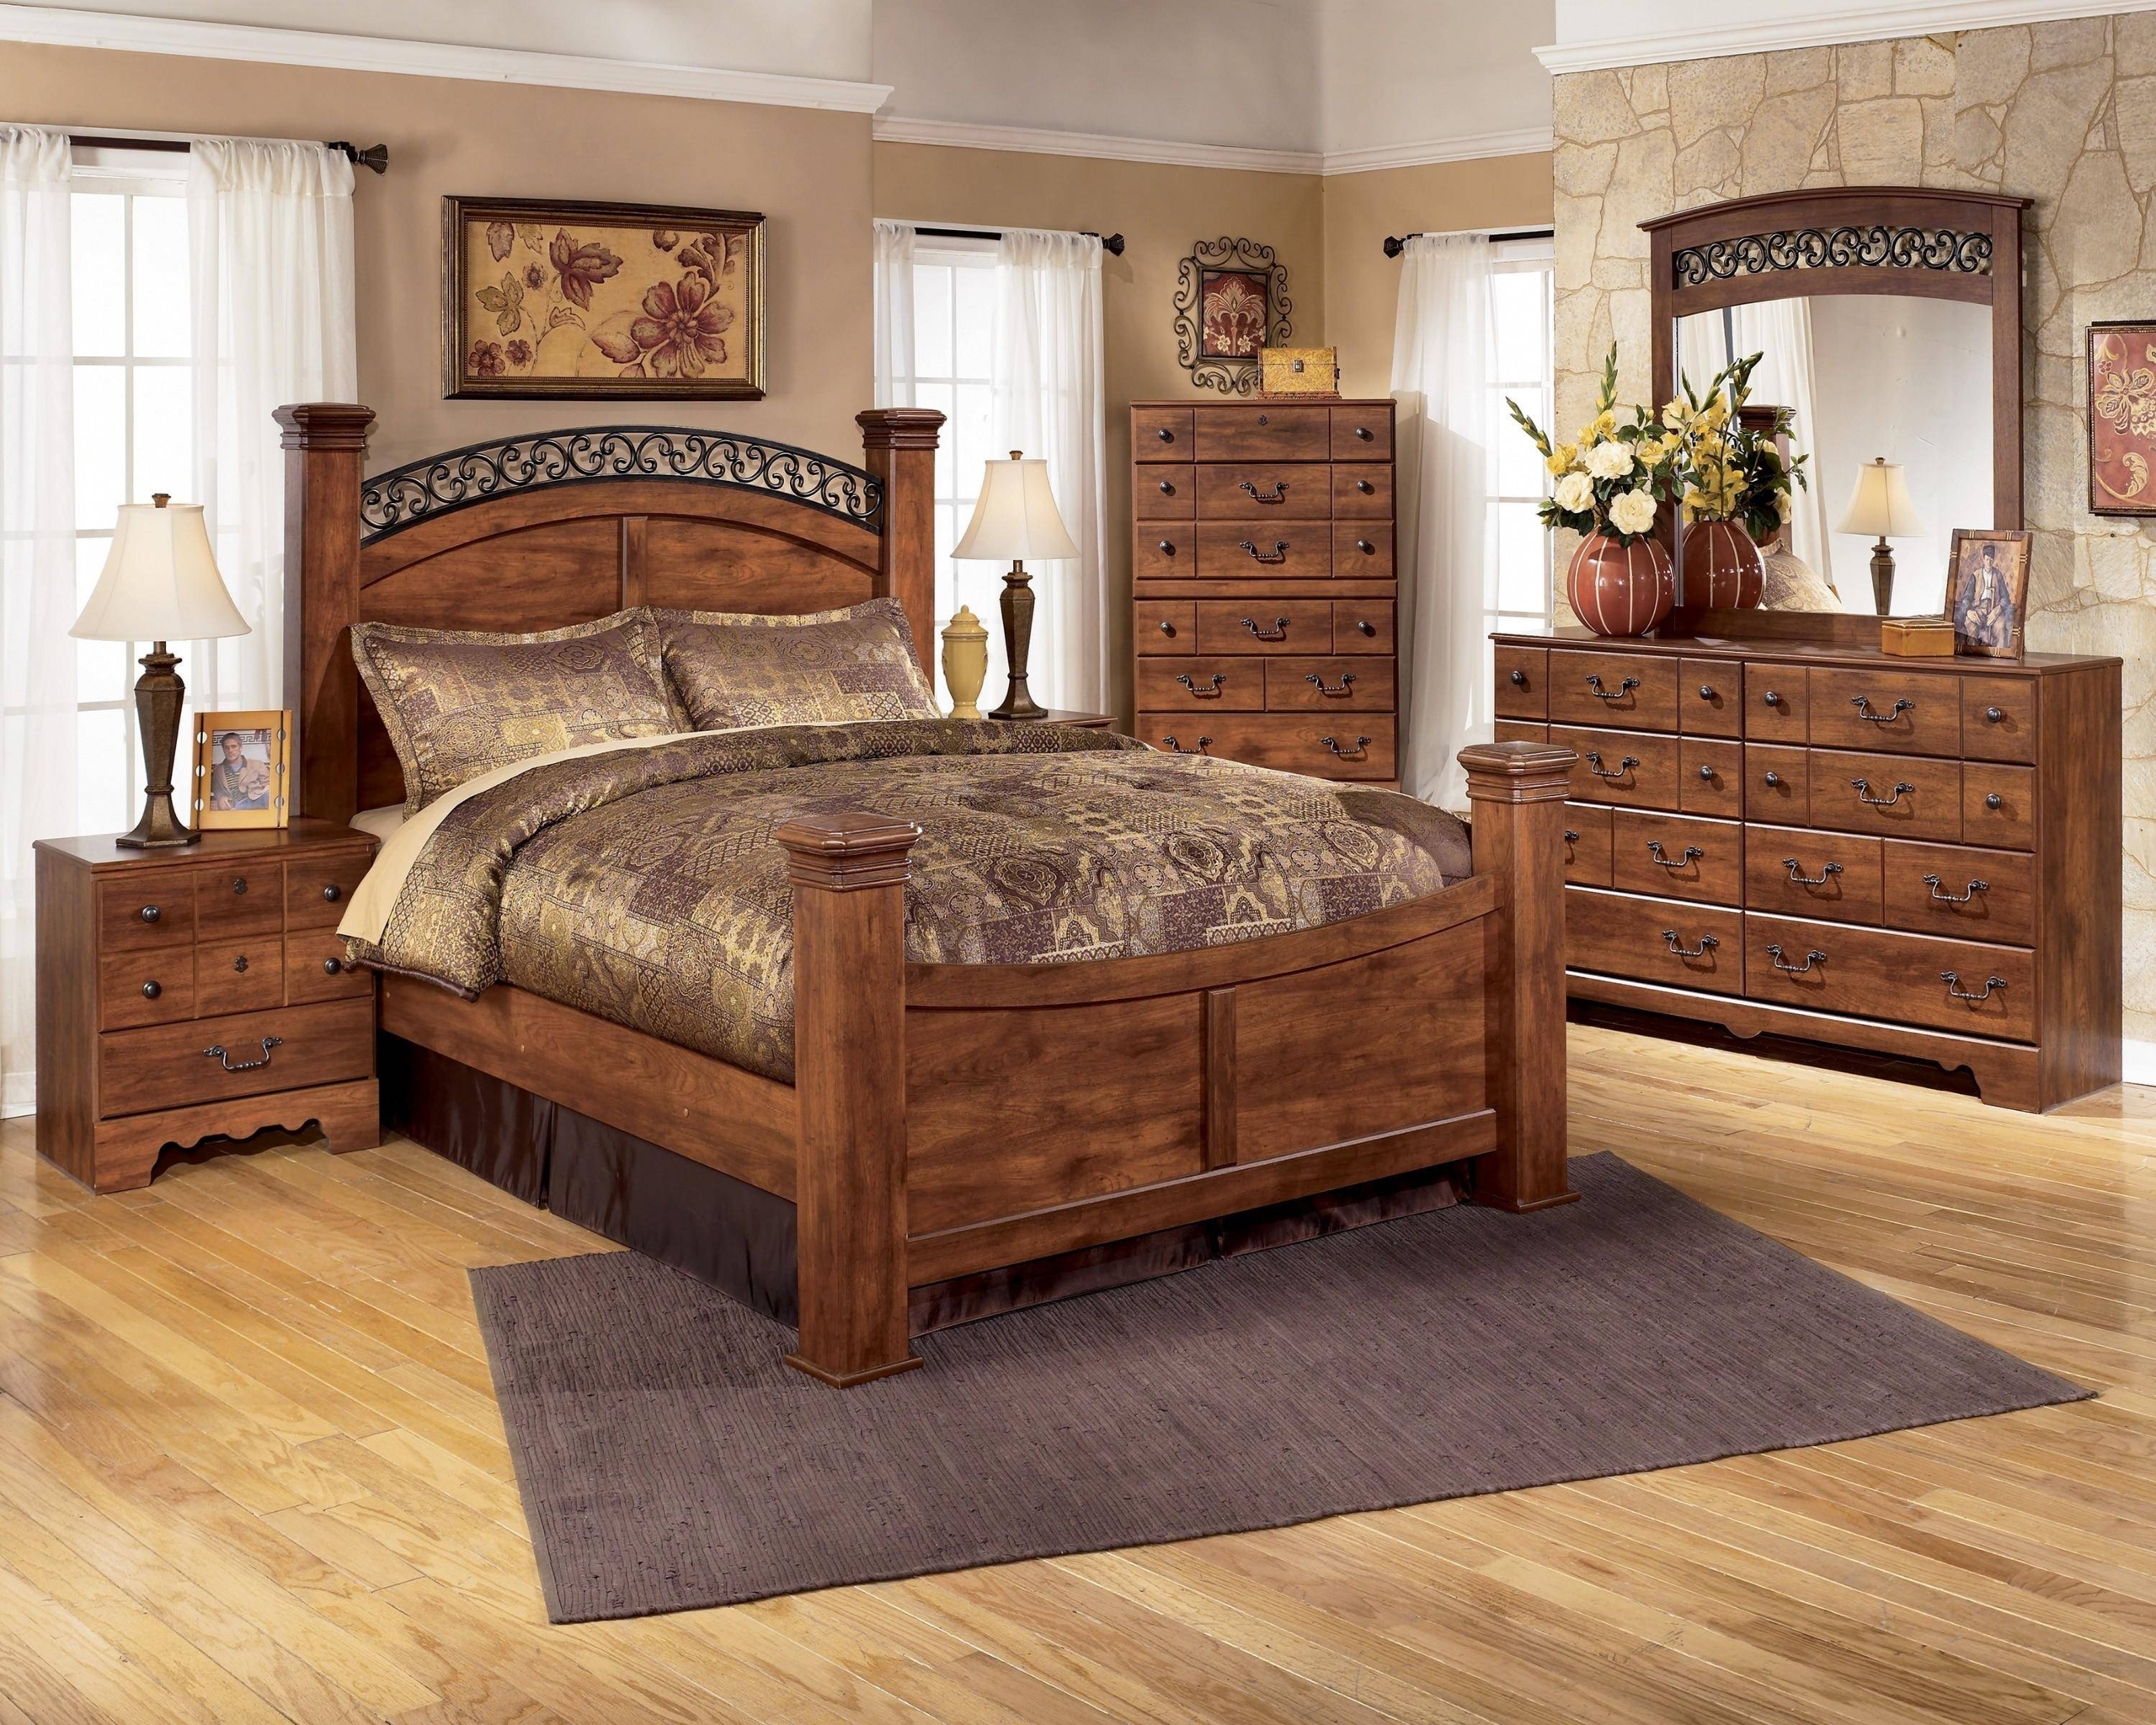 Real Wood Rustic Bedroom Sets / Free delivery and returns on ebay plus items for plus members